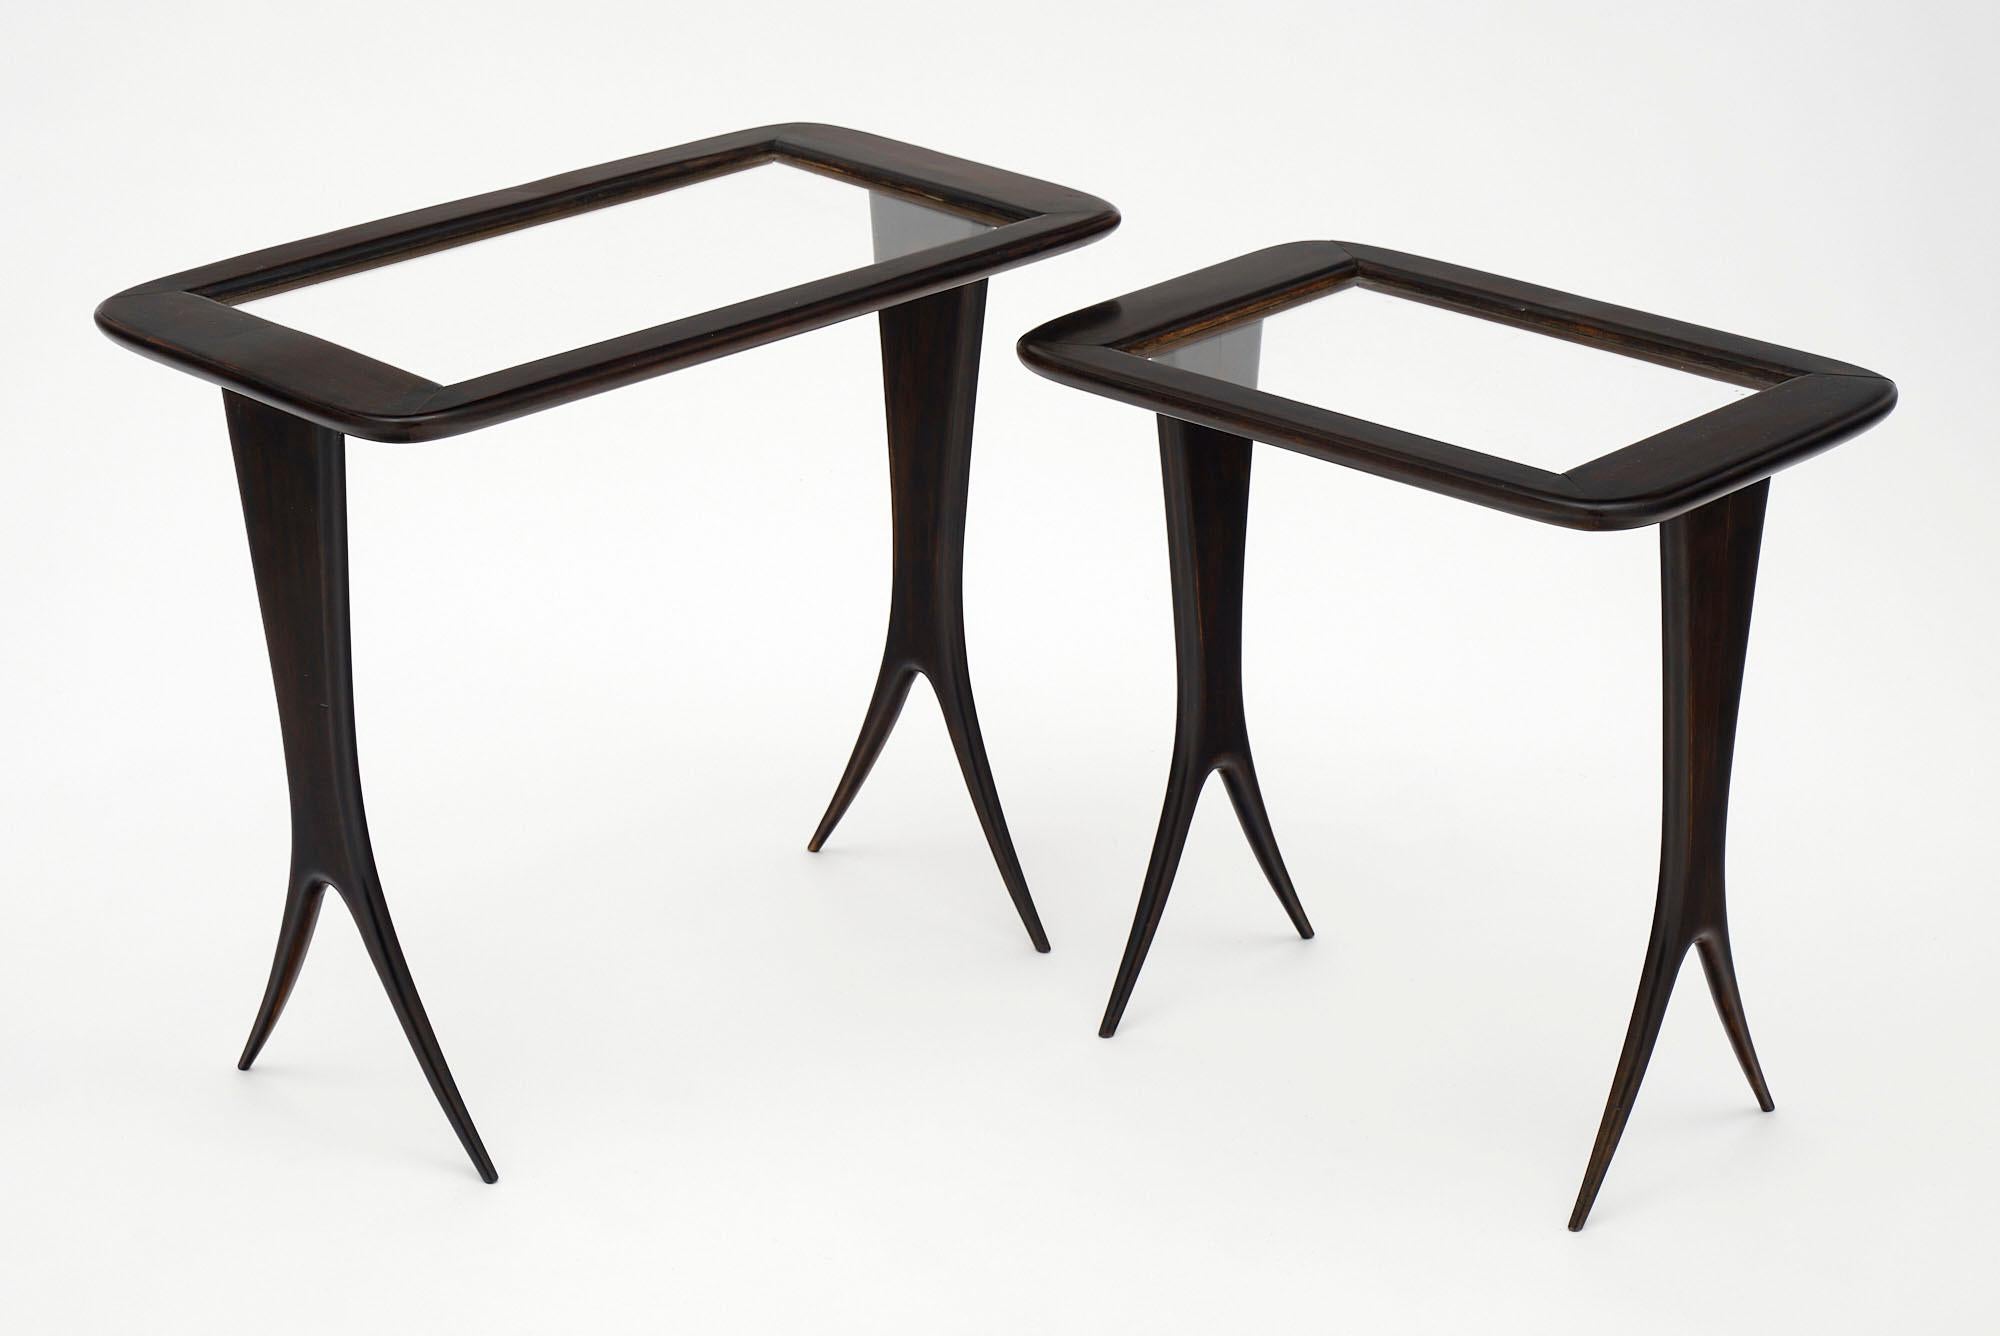 Pair of nesting tables from Italy made of ebonized mahogany and finished in a lustrous French polish. This elegant pair has split flaring legs in the style of Paolo Buffa and glass tops. The listed measurements are for the larger table. 

Small